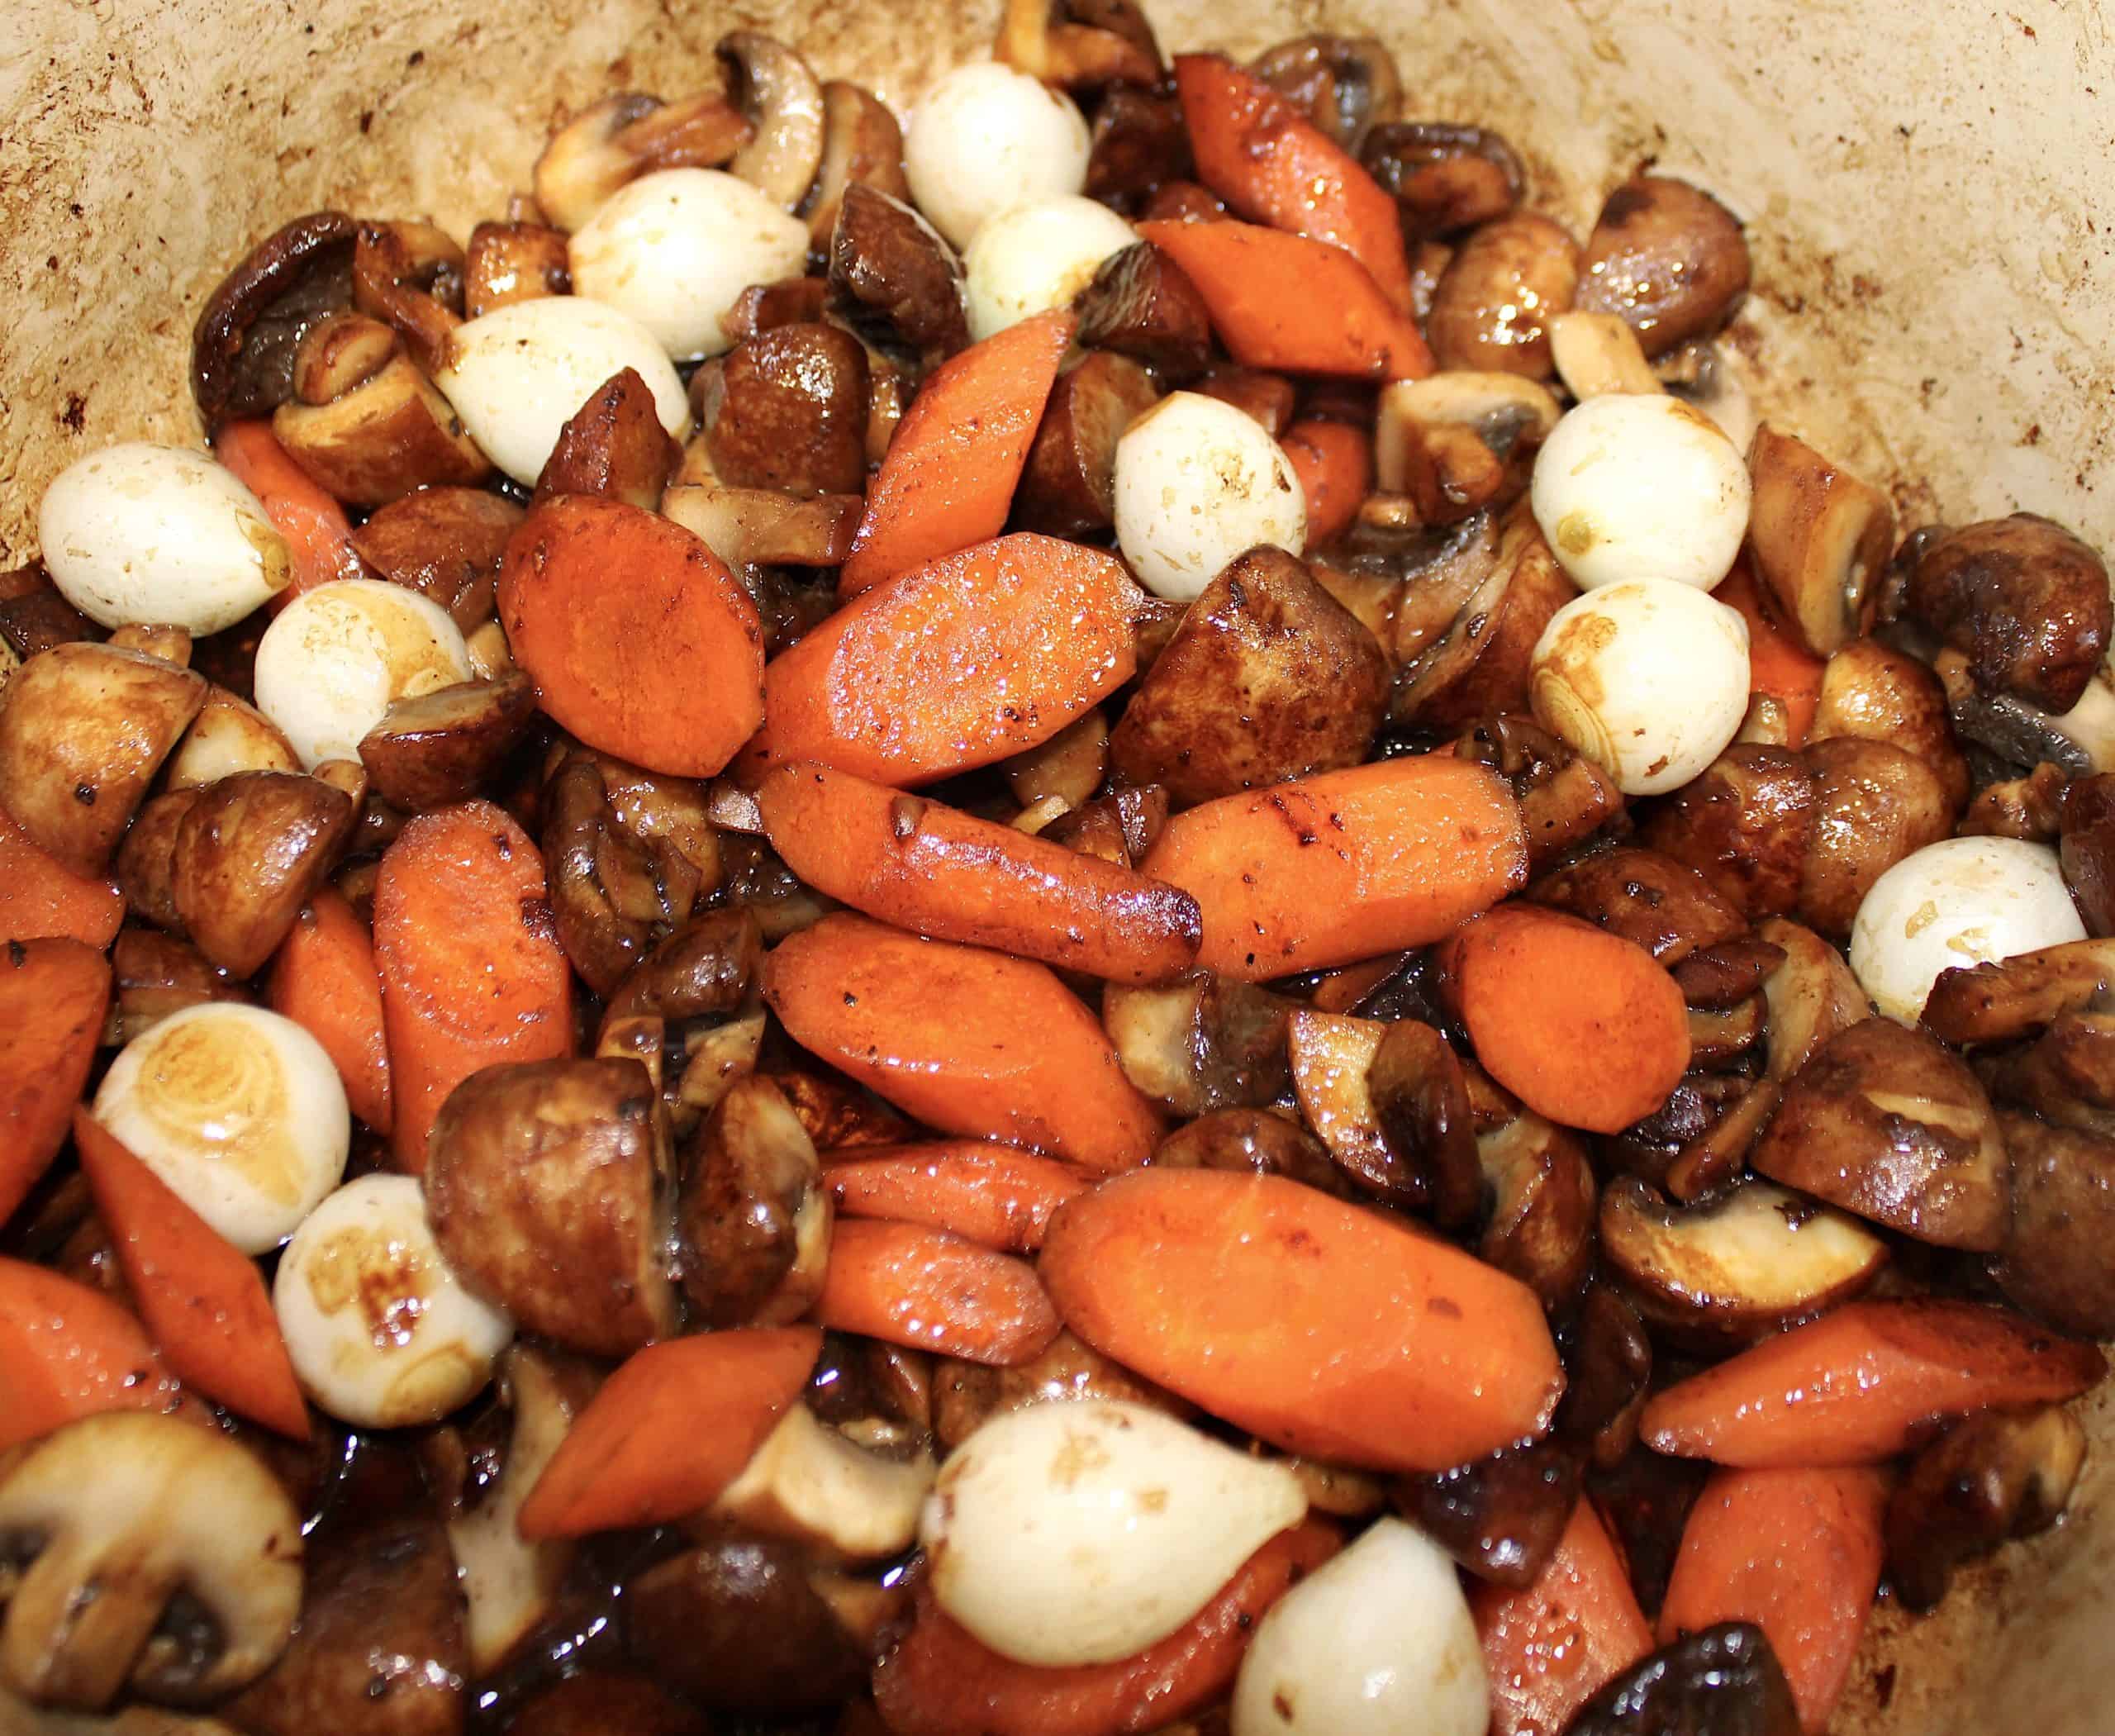 cooked carrots pearl onions and mushrooms in pot